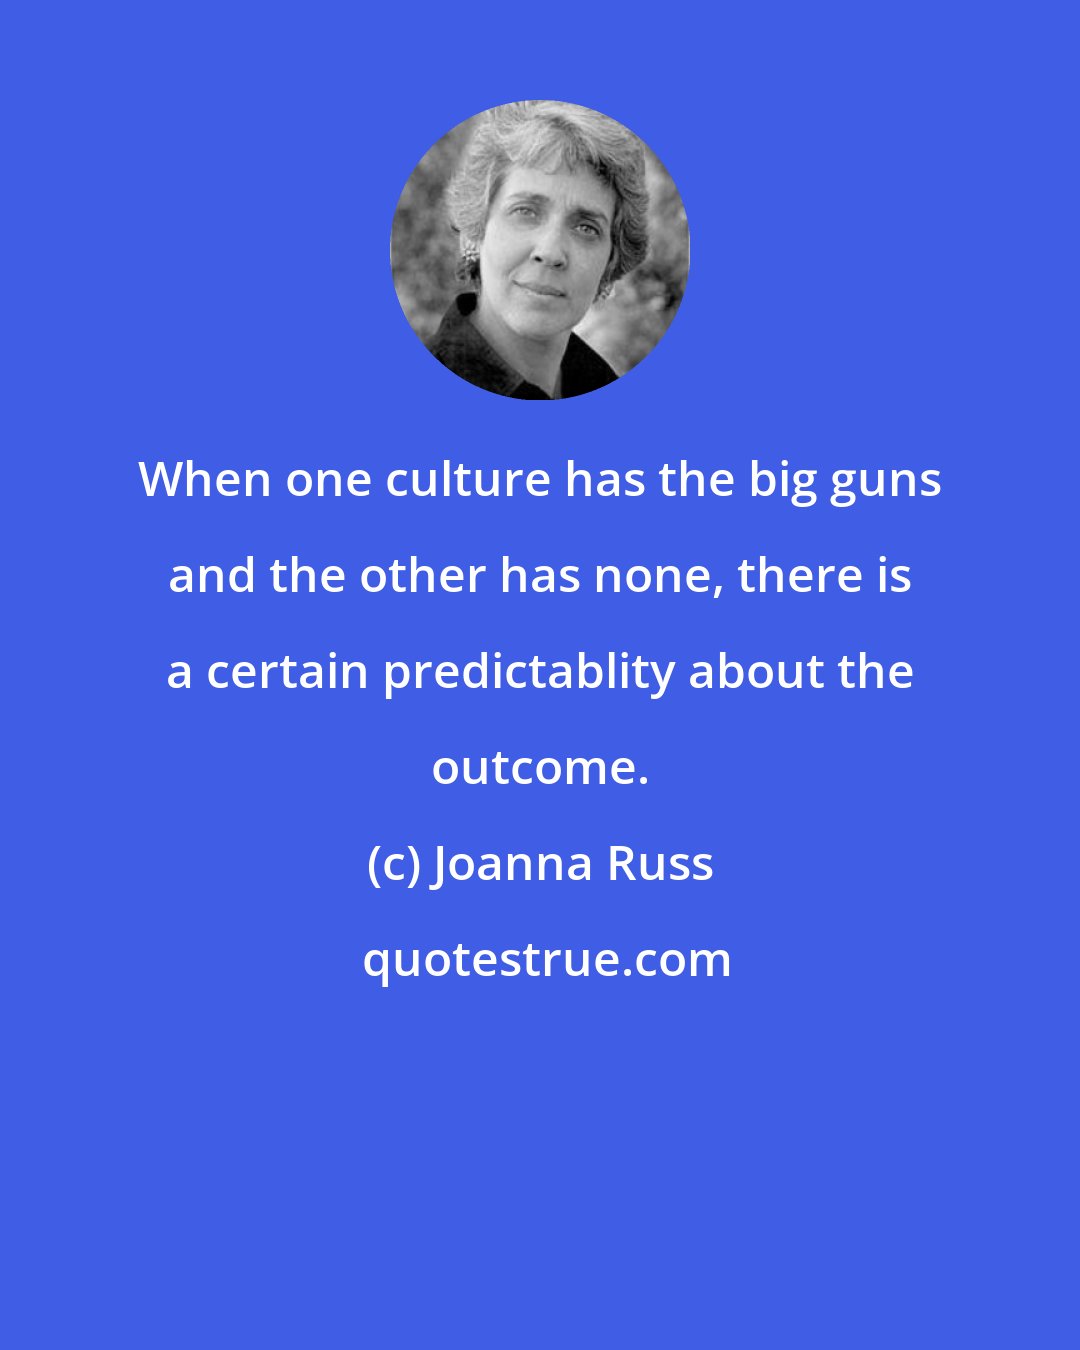 Joanna Russ: When one culture has the big guns and the other has none, there is a certain predictablity about the outcome.